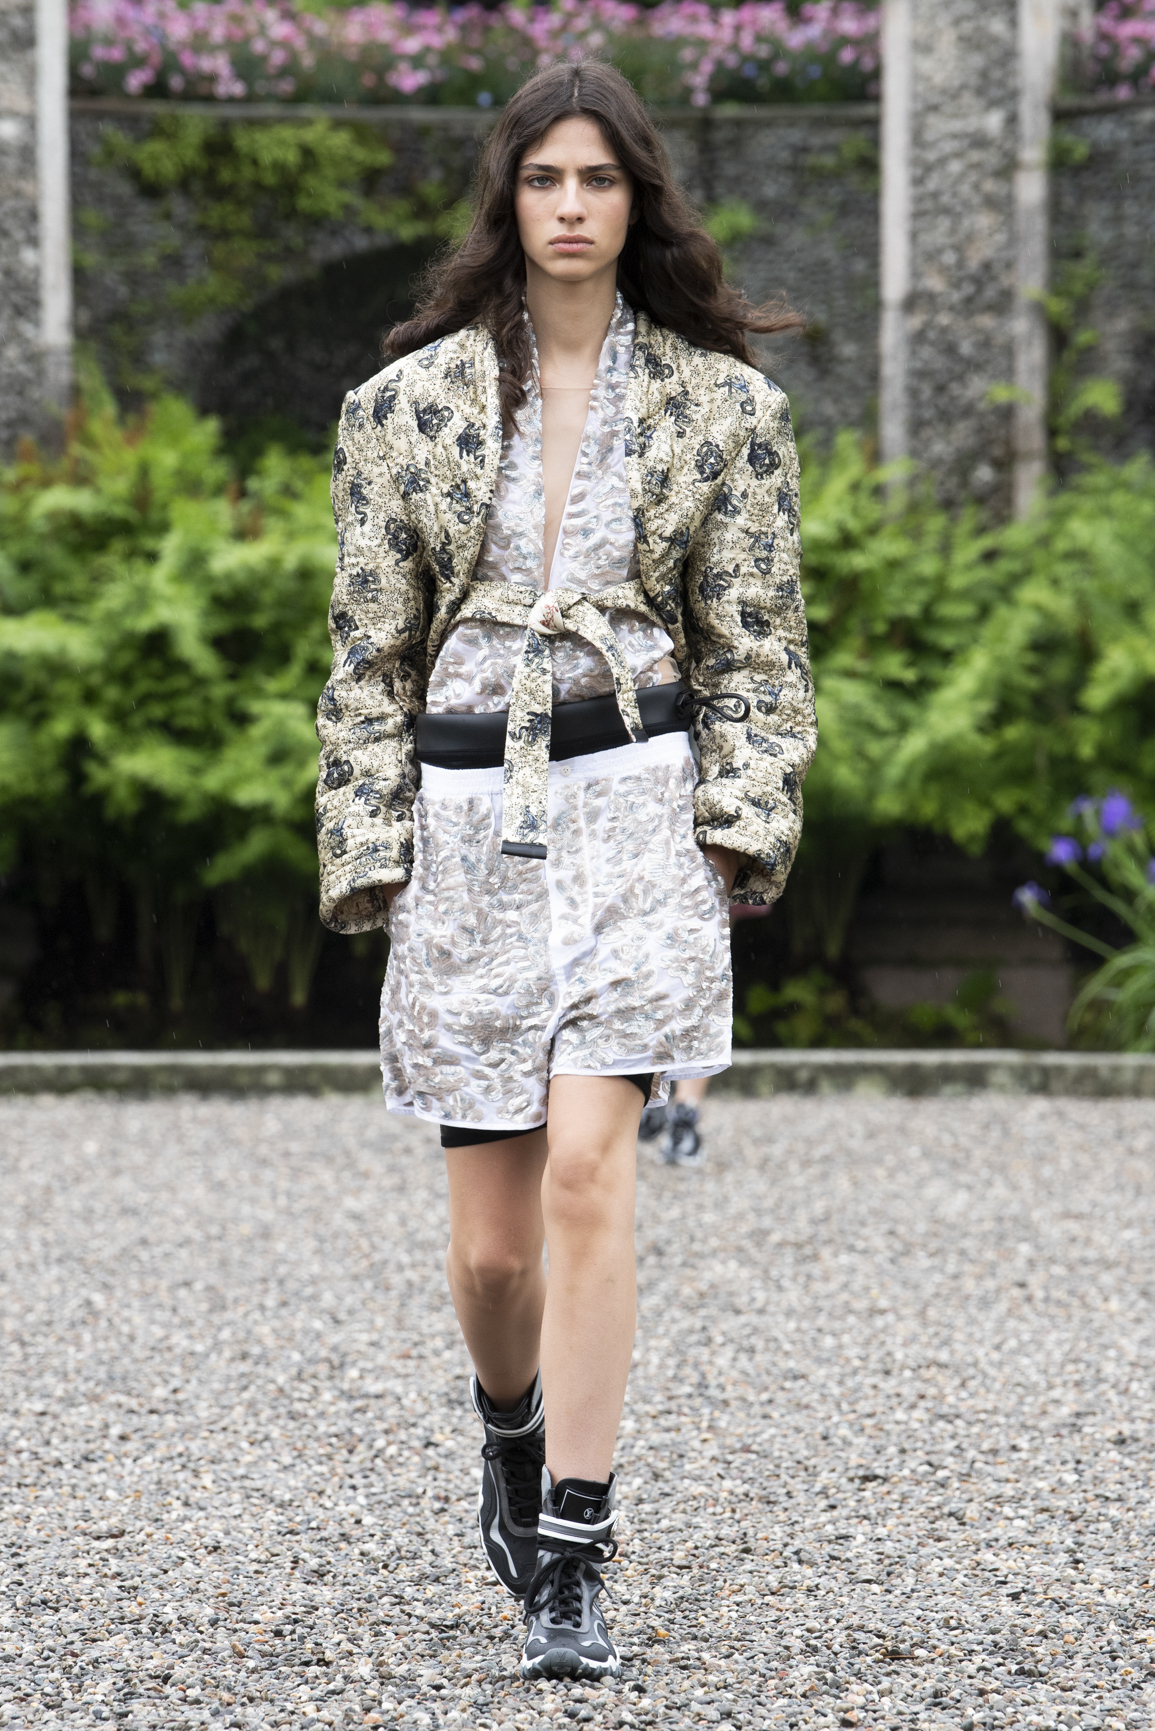 Isola Bella, Italy. 24th May, 2023. A model walks the catwalk for Louis  Vuitton Cruise Collection 2024 presentation held at Palazzo Borromeo in Isola  Bella, Italy on May 24, 2023. Photo by